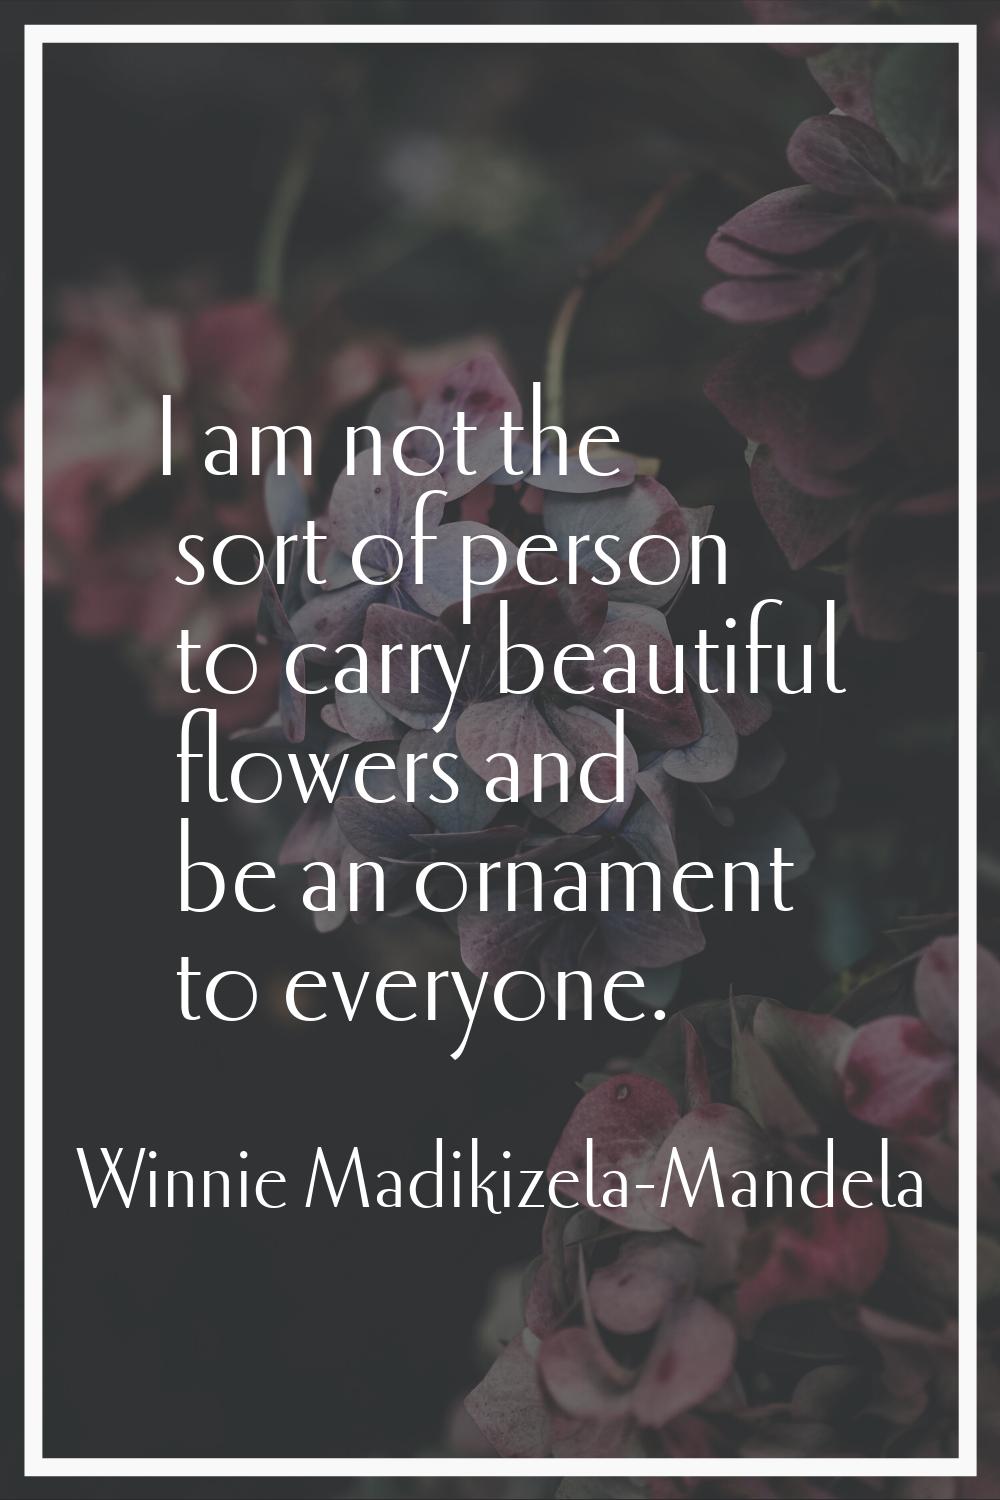 I am not the sort of person to carry beautiful flowers and be an ornament to everyone.